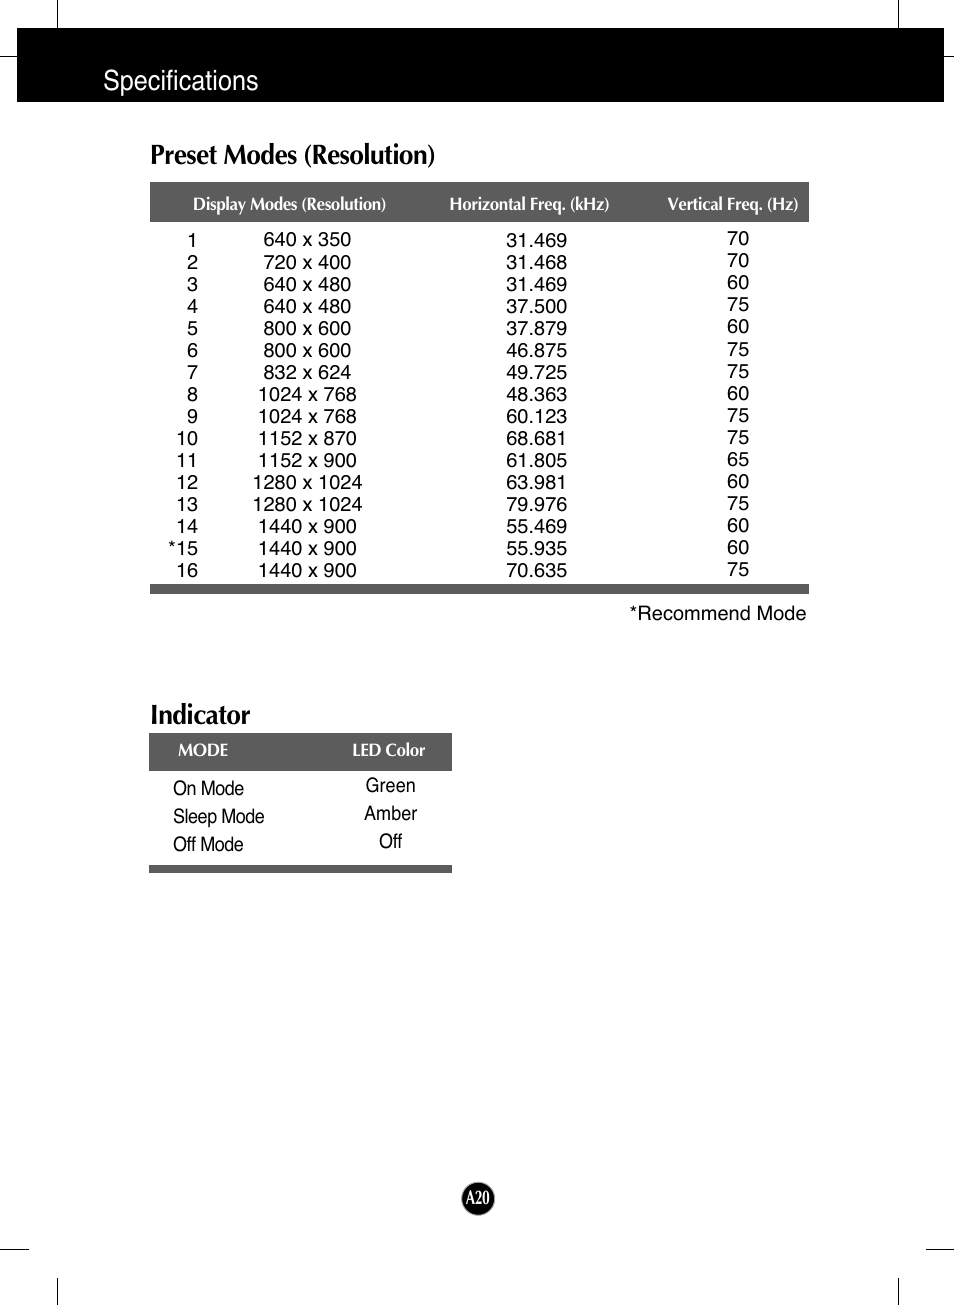 Preset modes (resolution), Indicator, Specifications indicator | LG L192WS-SN User Manual | Page 21 / 24